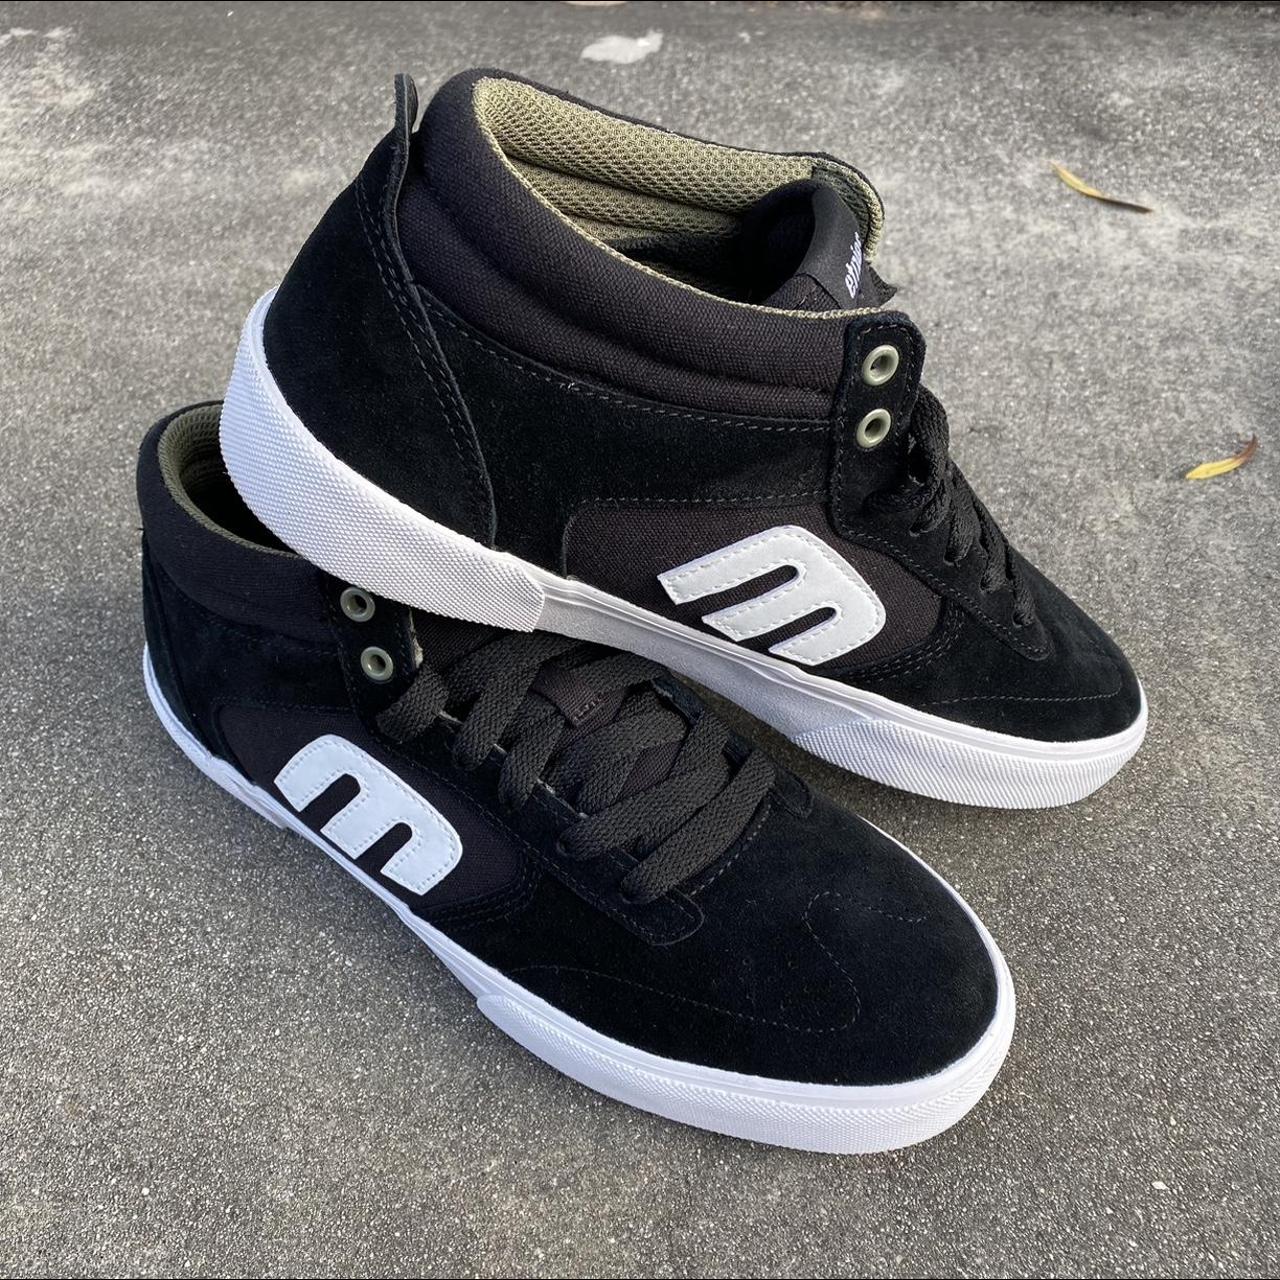 Etnies Men's Black and White Trainers (4)